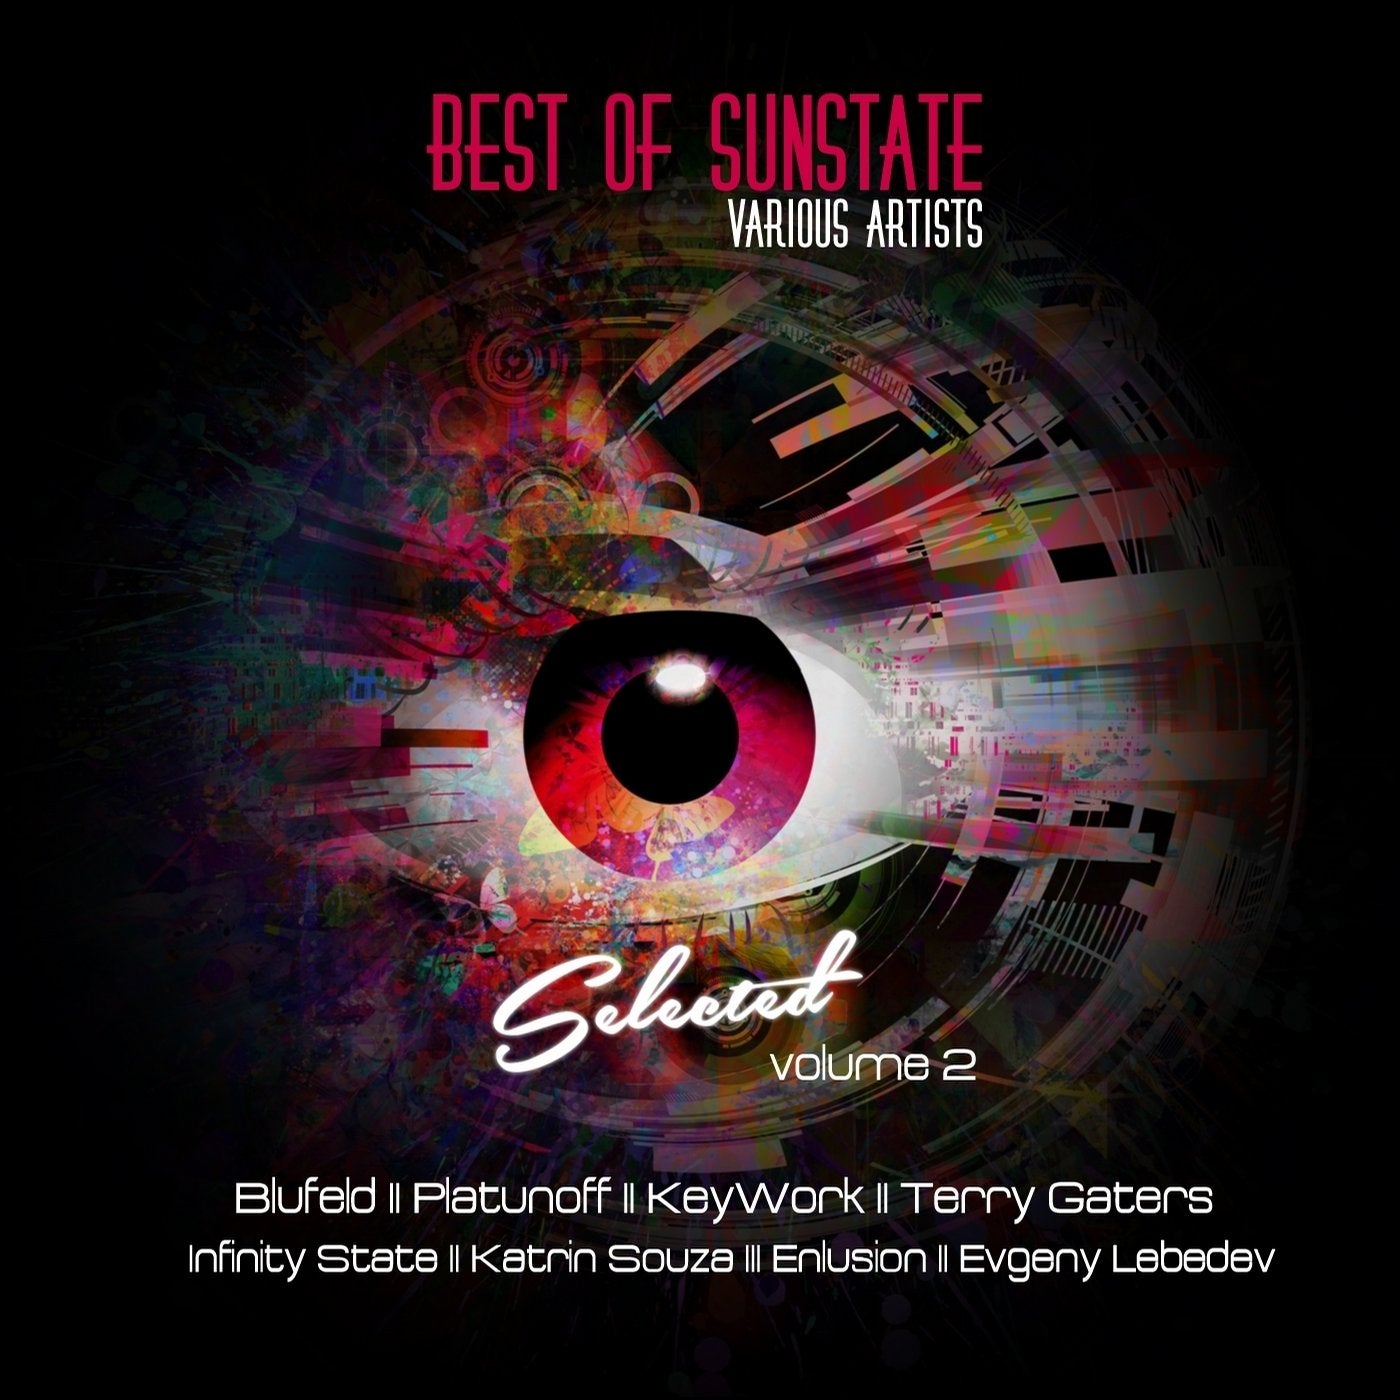 Sunstate Selected, Vol. 2